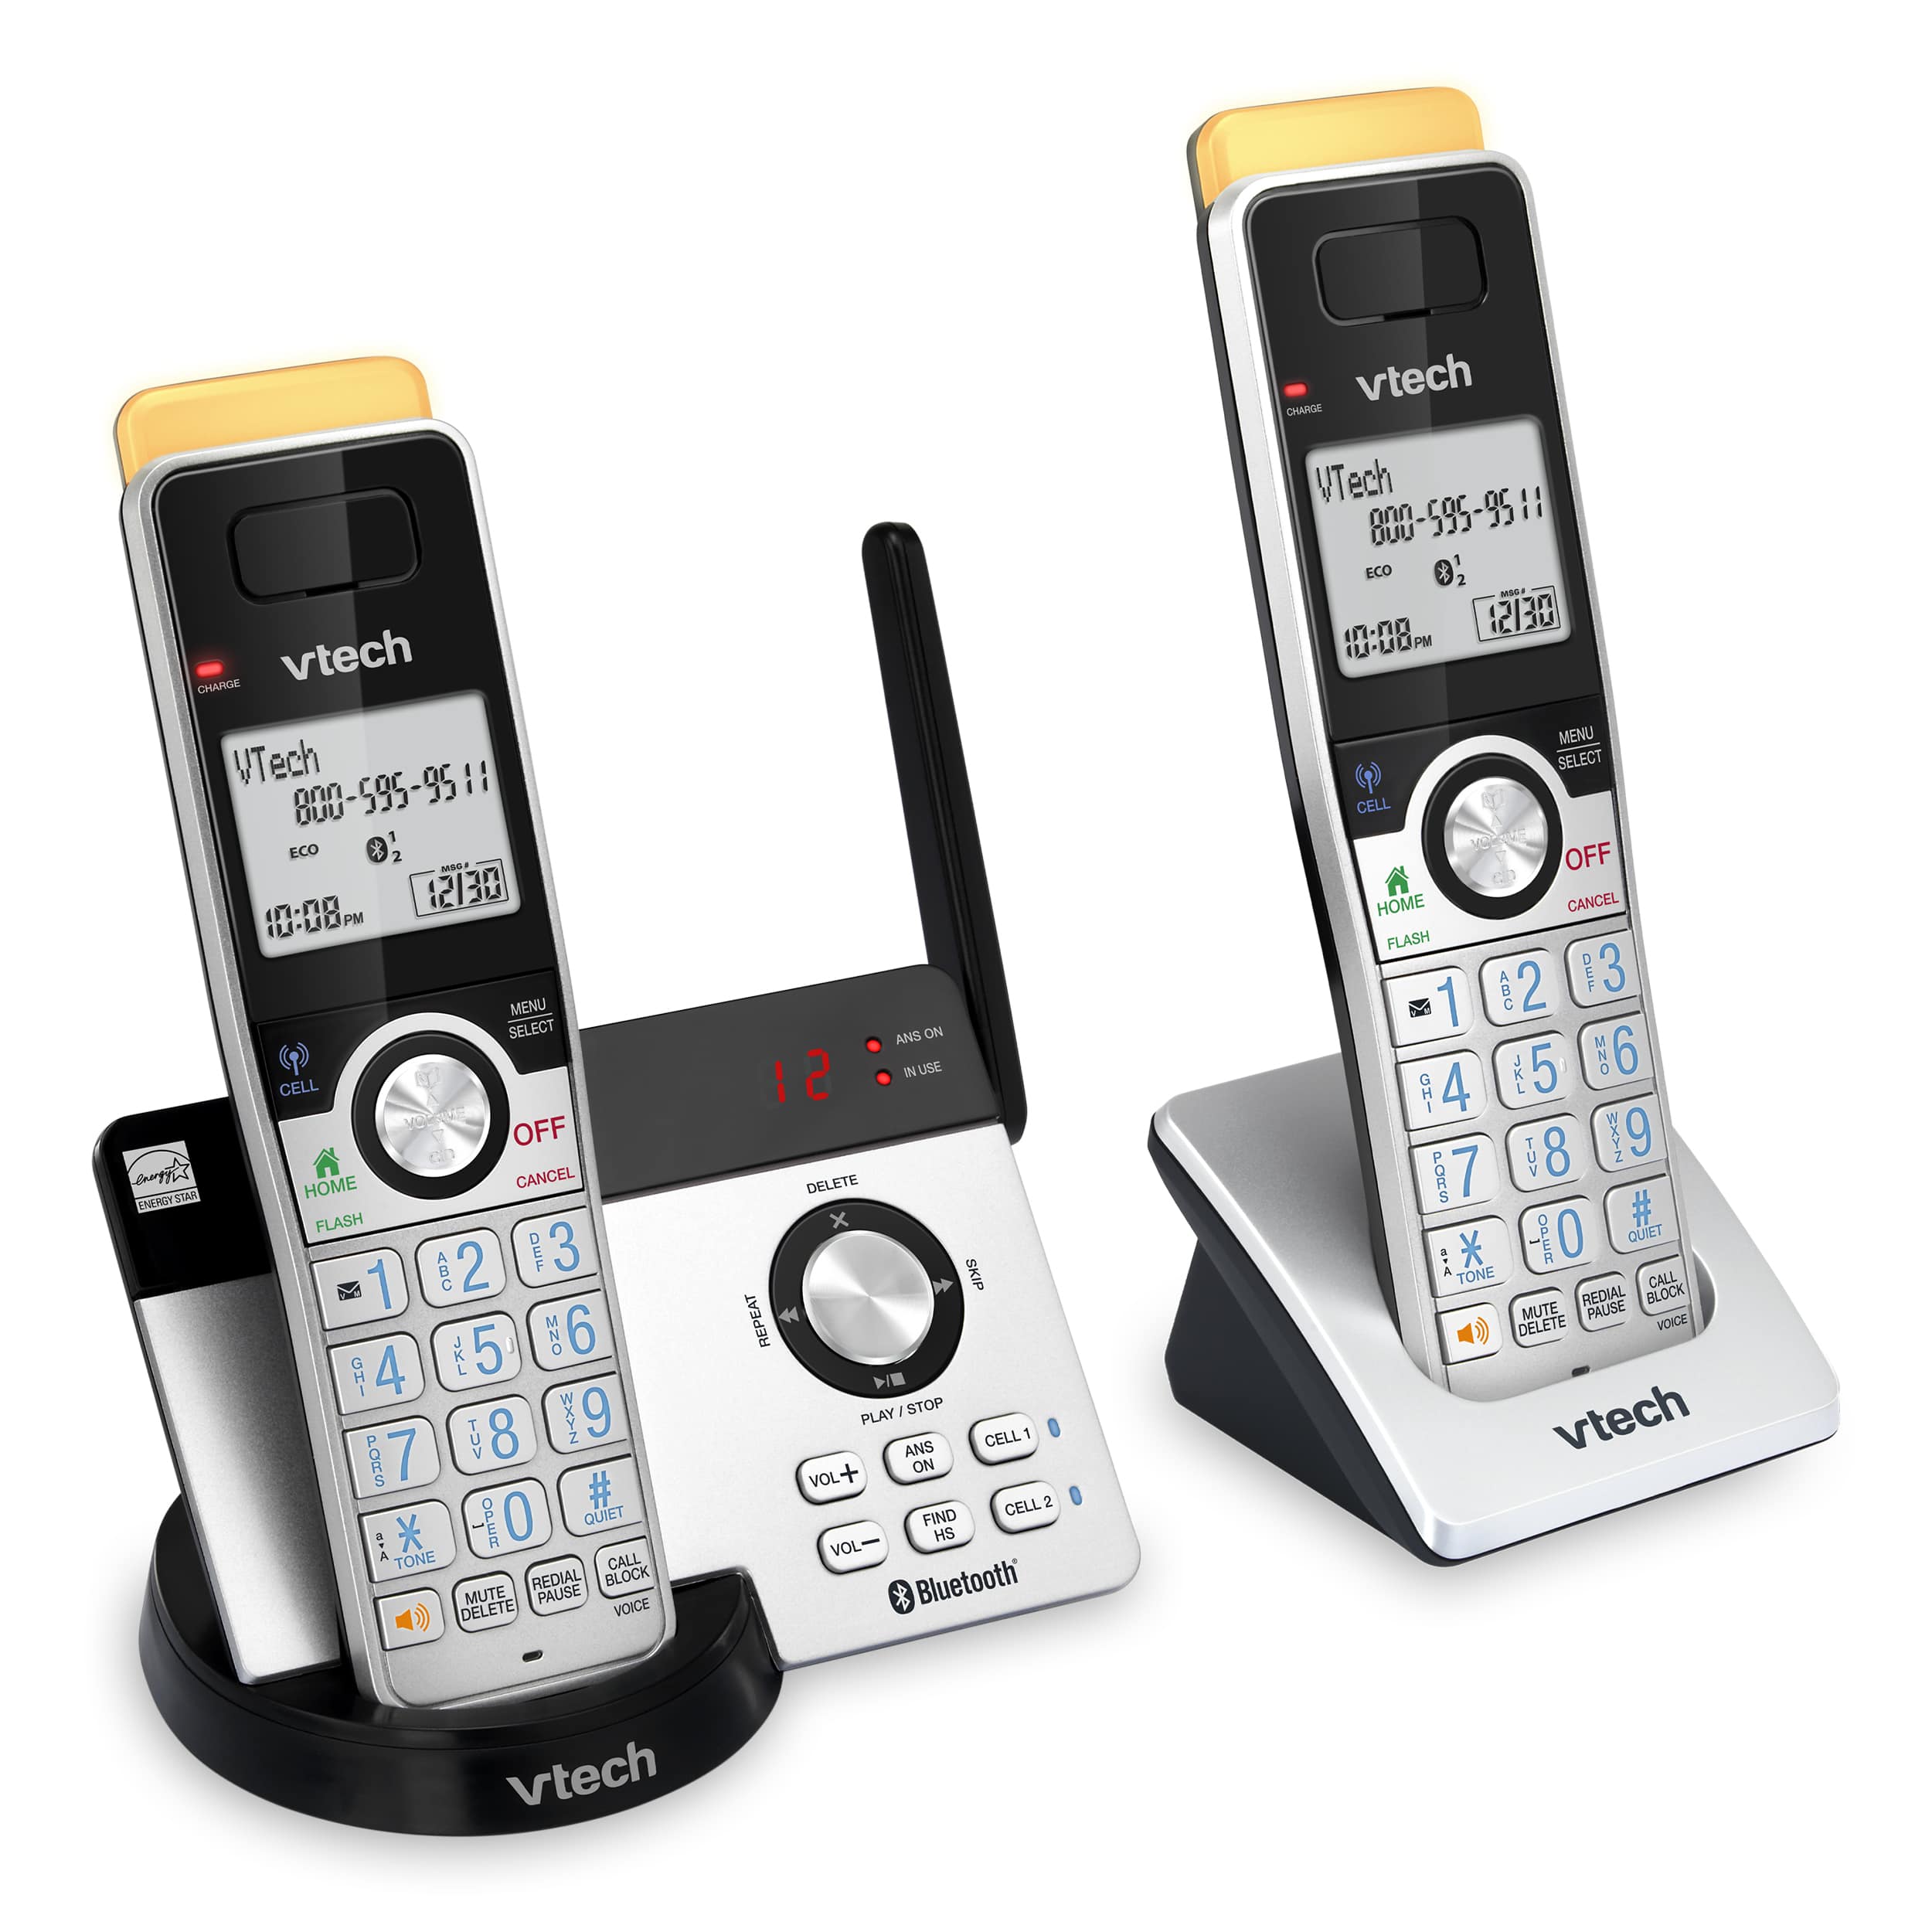 2-Handset Expandable Cordless Phone with Super Long Range, Bluetooth Connect to Cell, Smart Call Blocker and Answering System - view 3